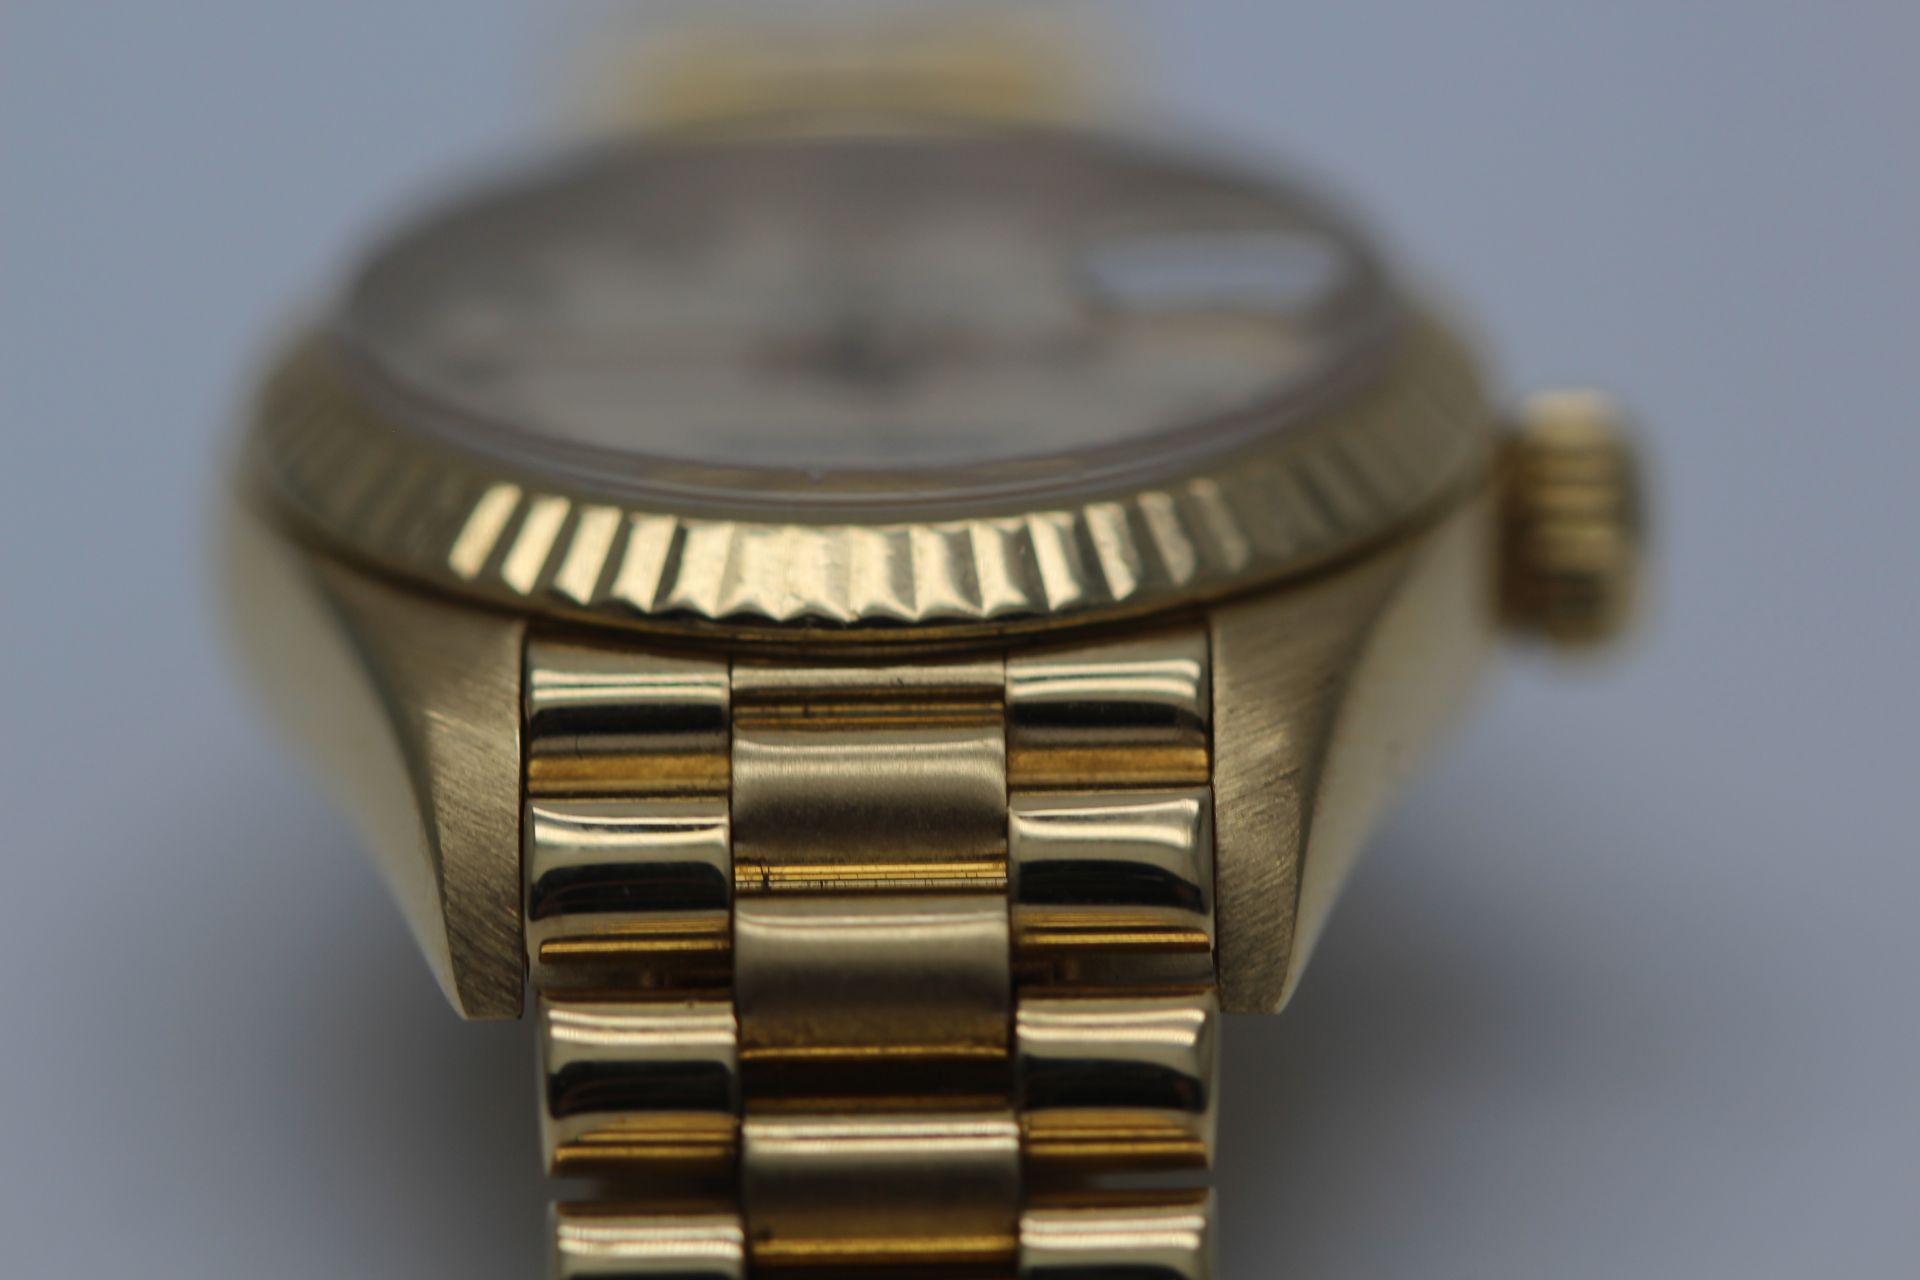 ROLEX, LADIES 18CT GOLD DATEJUST SET WITH CREME DIAL - Image 7 of 9